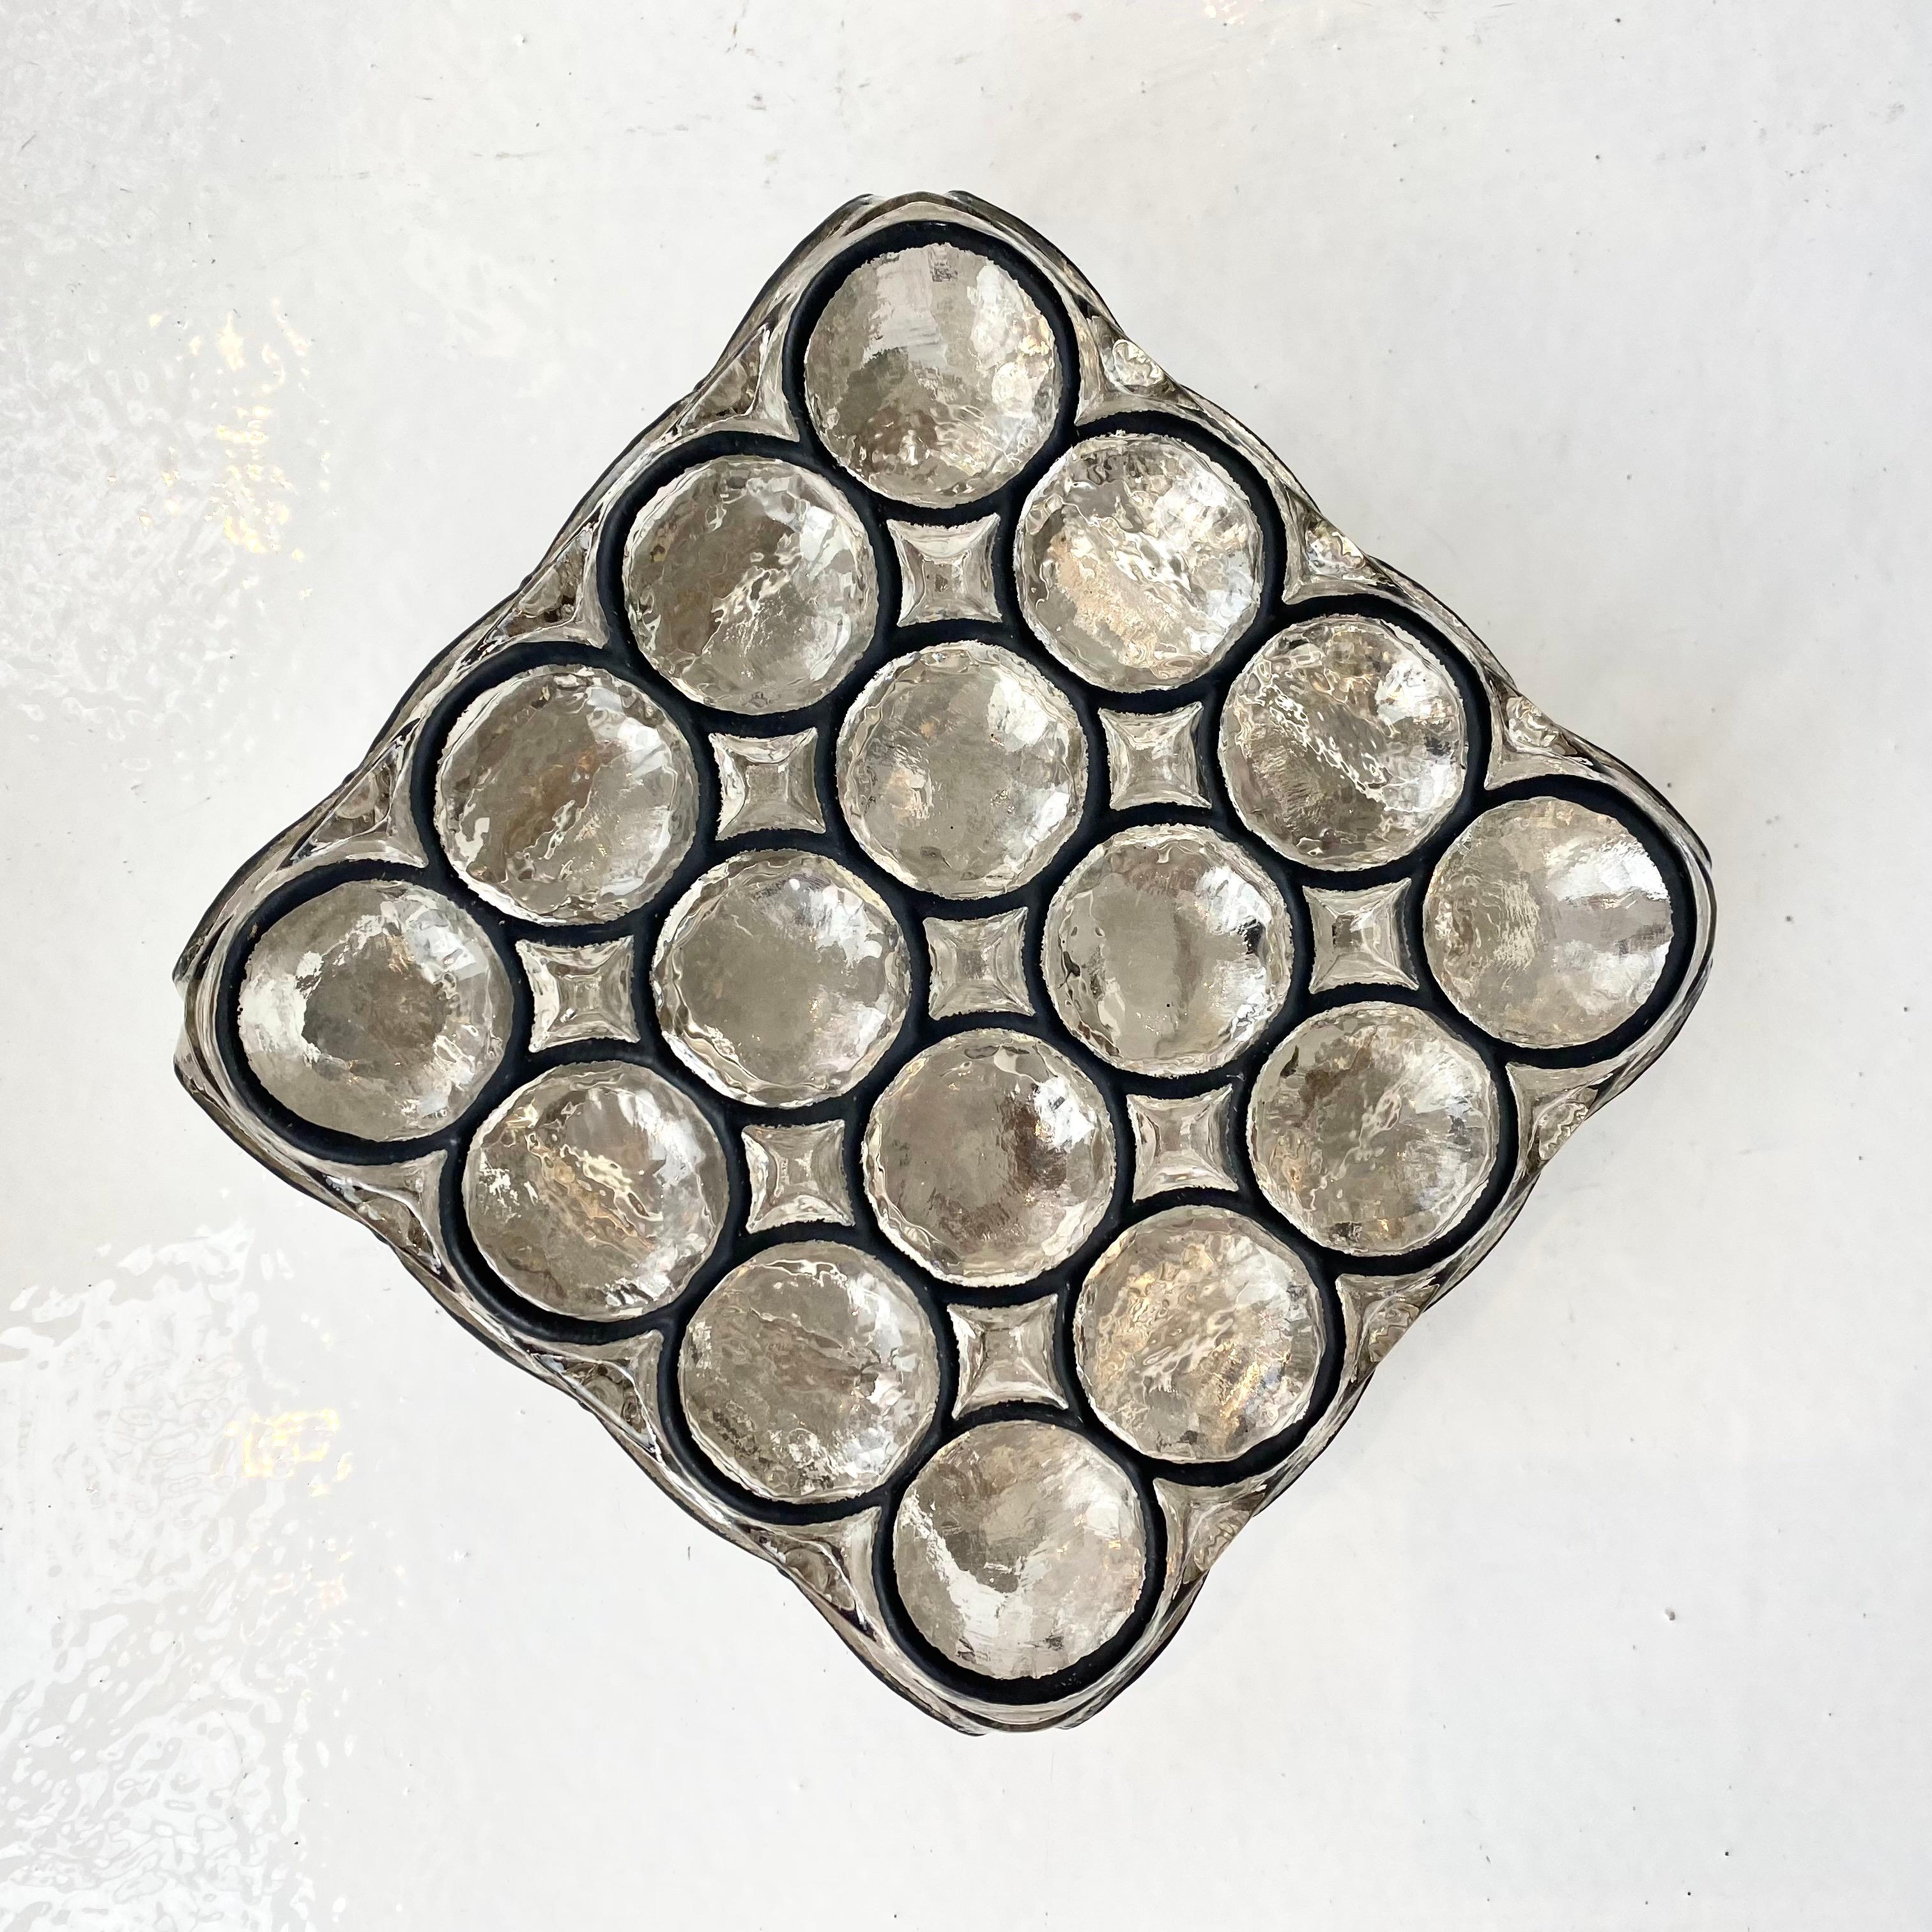 Petite Limburg flush mount or wall sconce. Circa 1960s. Illuminates beautifully with iron circles inlaid in thick square glass. This gorgeous design is based on the traditional church window patterns of European cathedrals and churches.